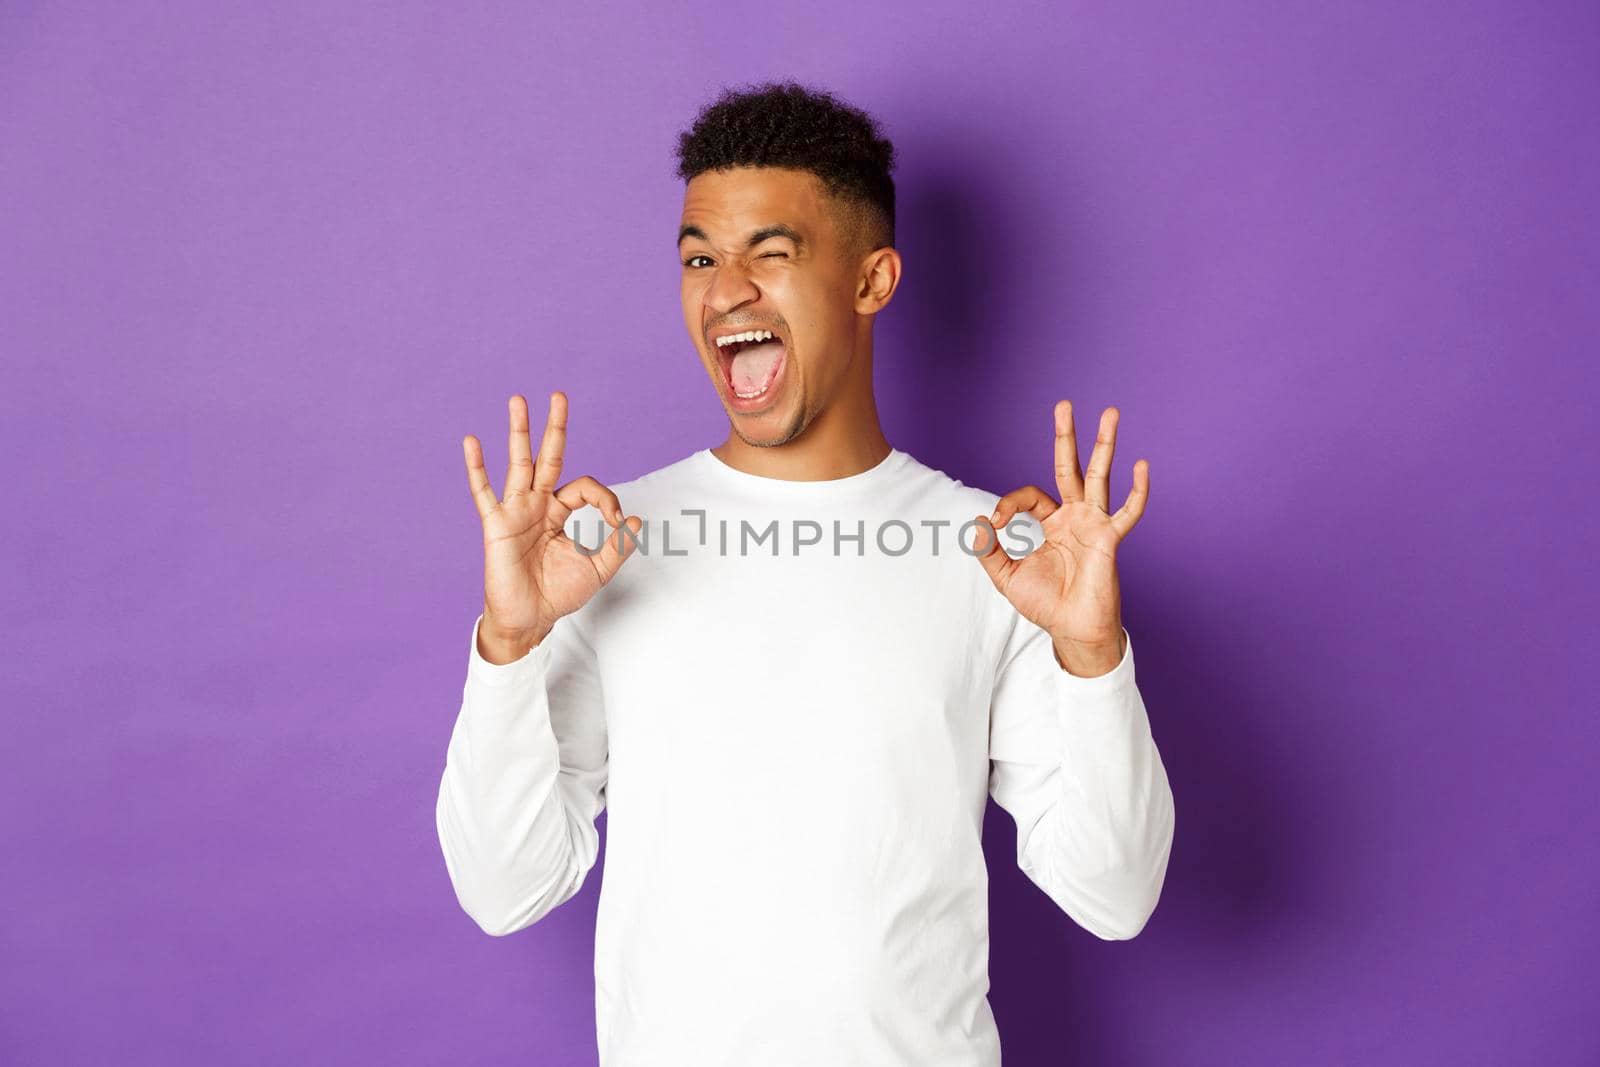 Image of happy and pleased african-american guy, winking and smiling, showing okay signs, recommend good promo offer, like and approve something, standing over purple background.